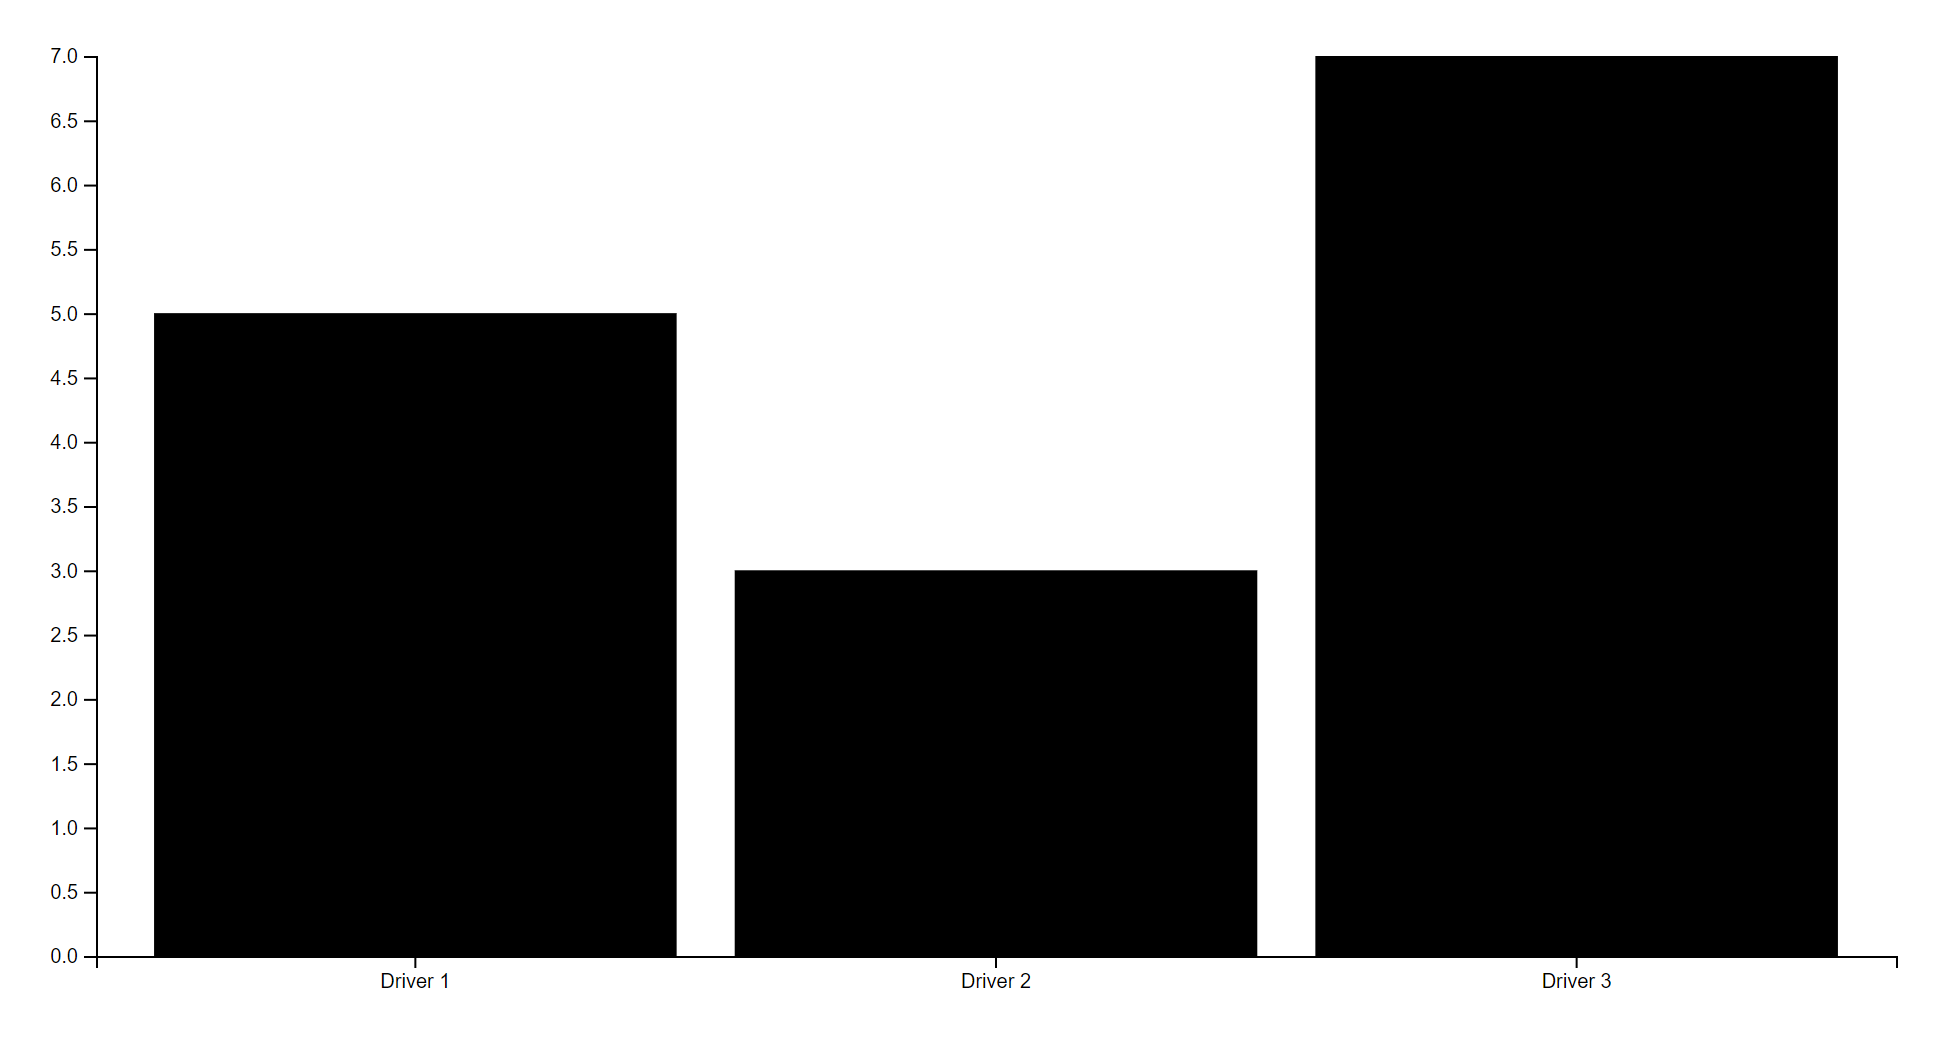 bar chart with three bars labeled "Driver 1", "Driver 2" and "Driver 3", and with value labels on the y-axis ranging from "0.0" to "7.0" in increments of 0.5